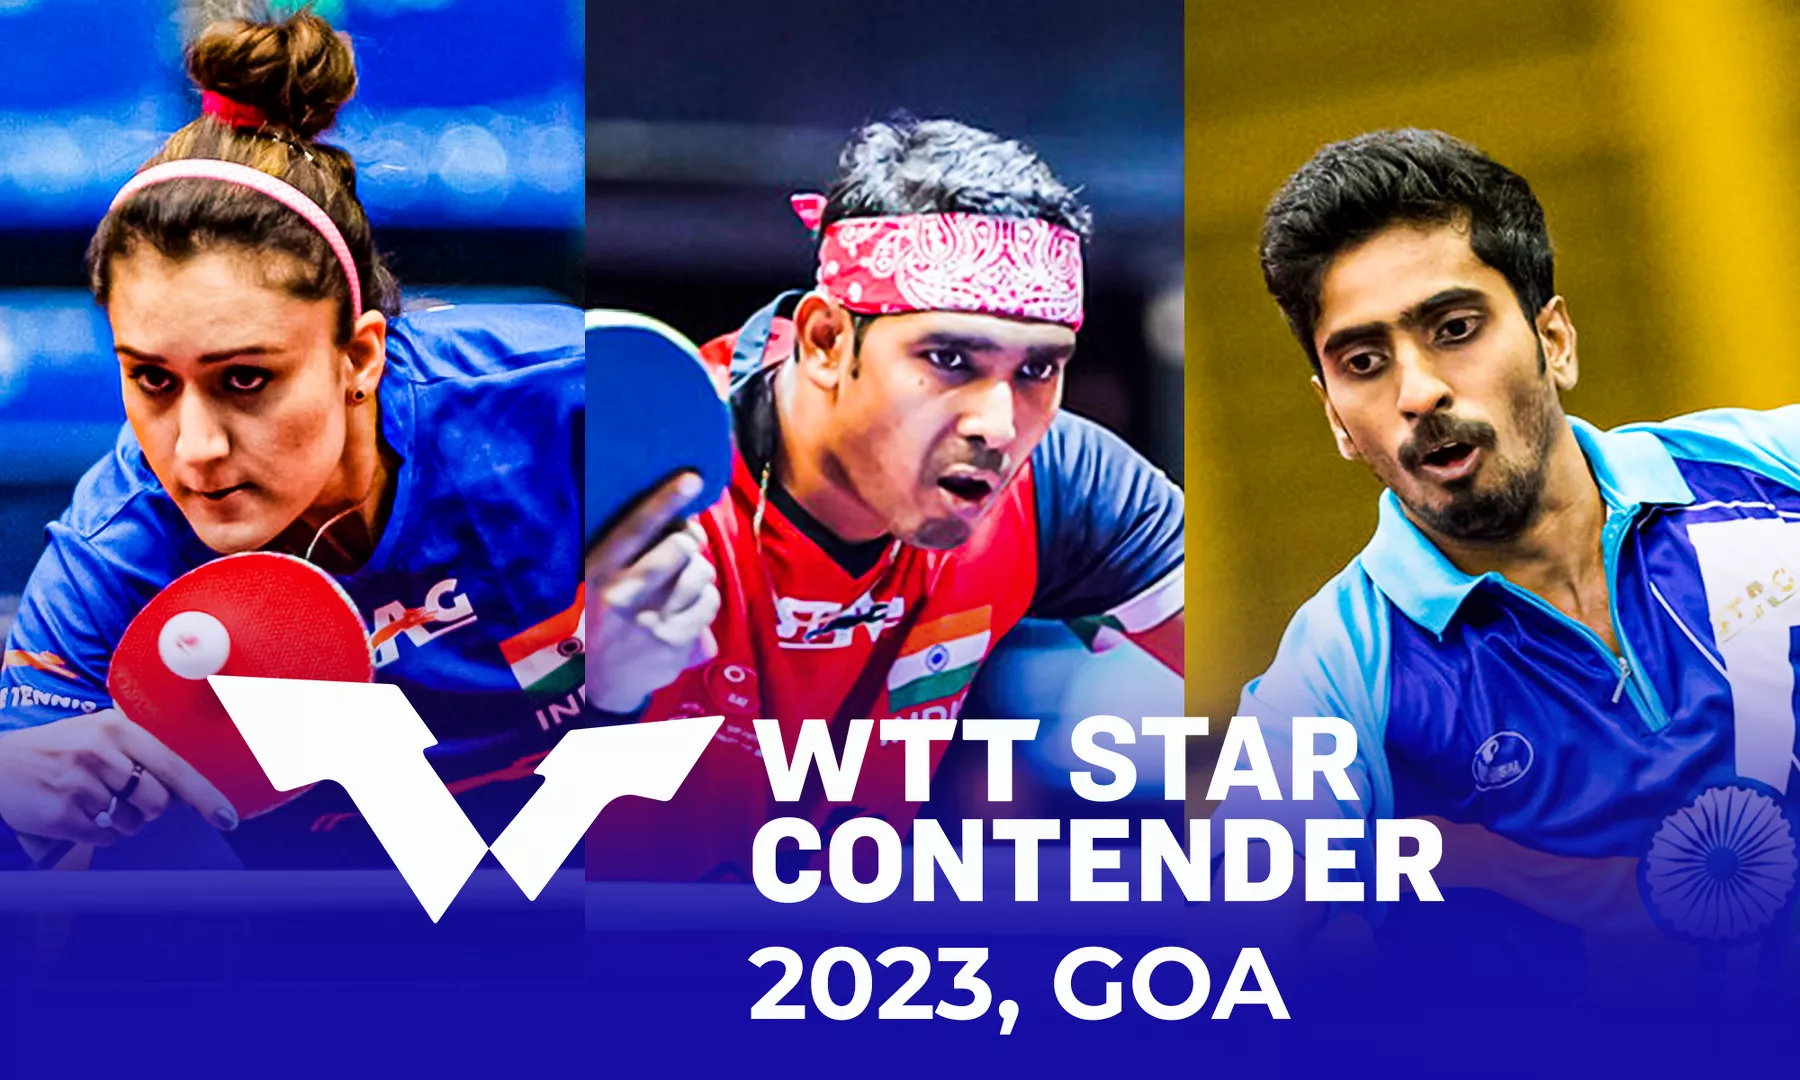 WTT Star Contender 2023 Goa Full schedule, fixtures, results and live